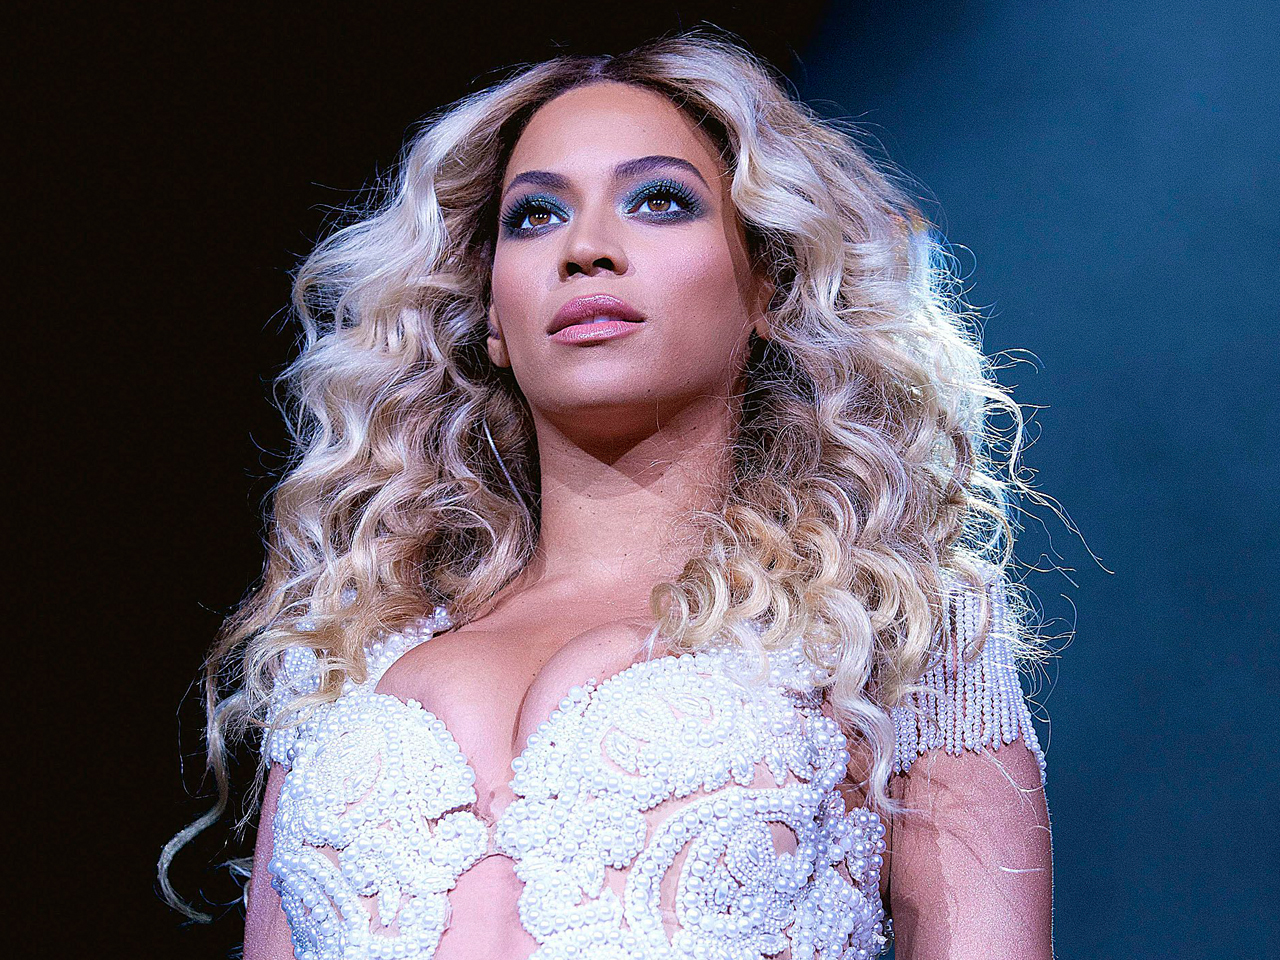 Beyonce criticized for sampling audio from shuttle Challenger disaster - TODAY.com1280 x 960